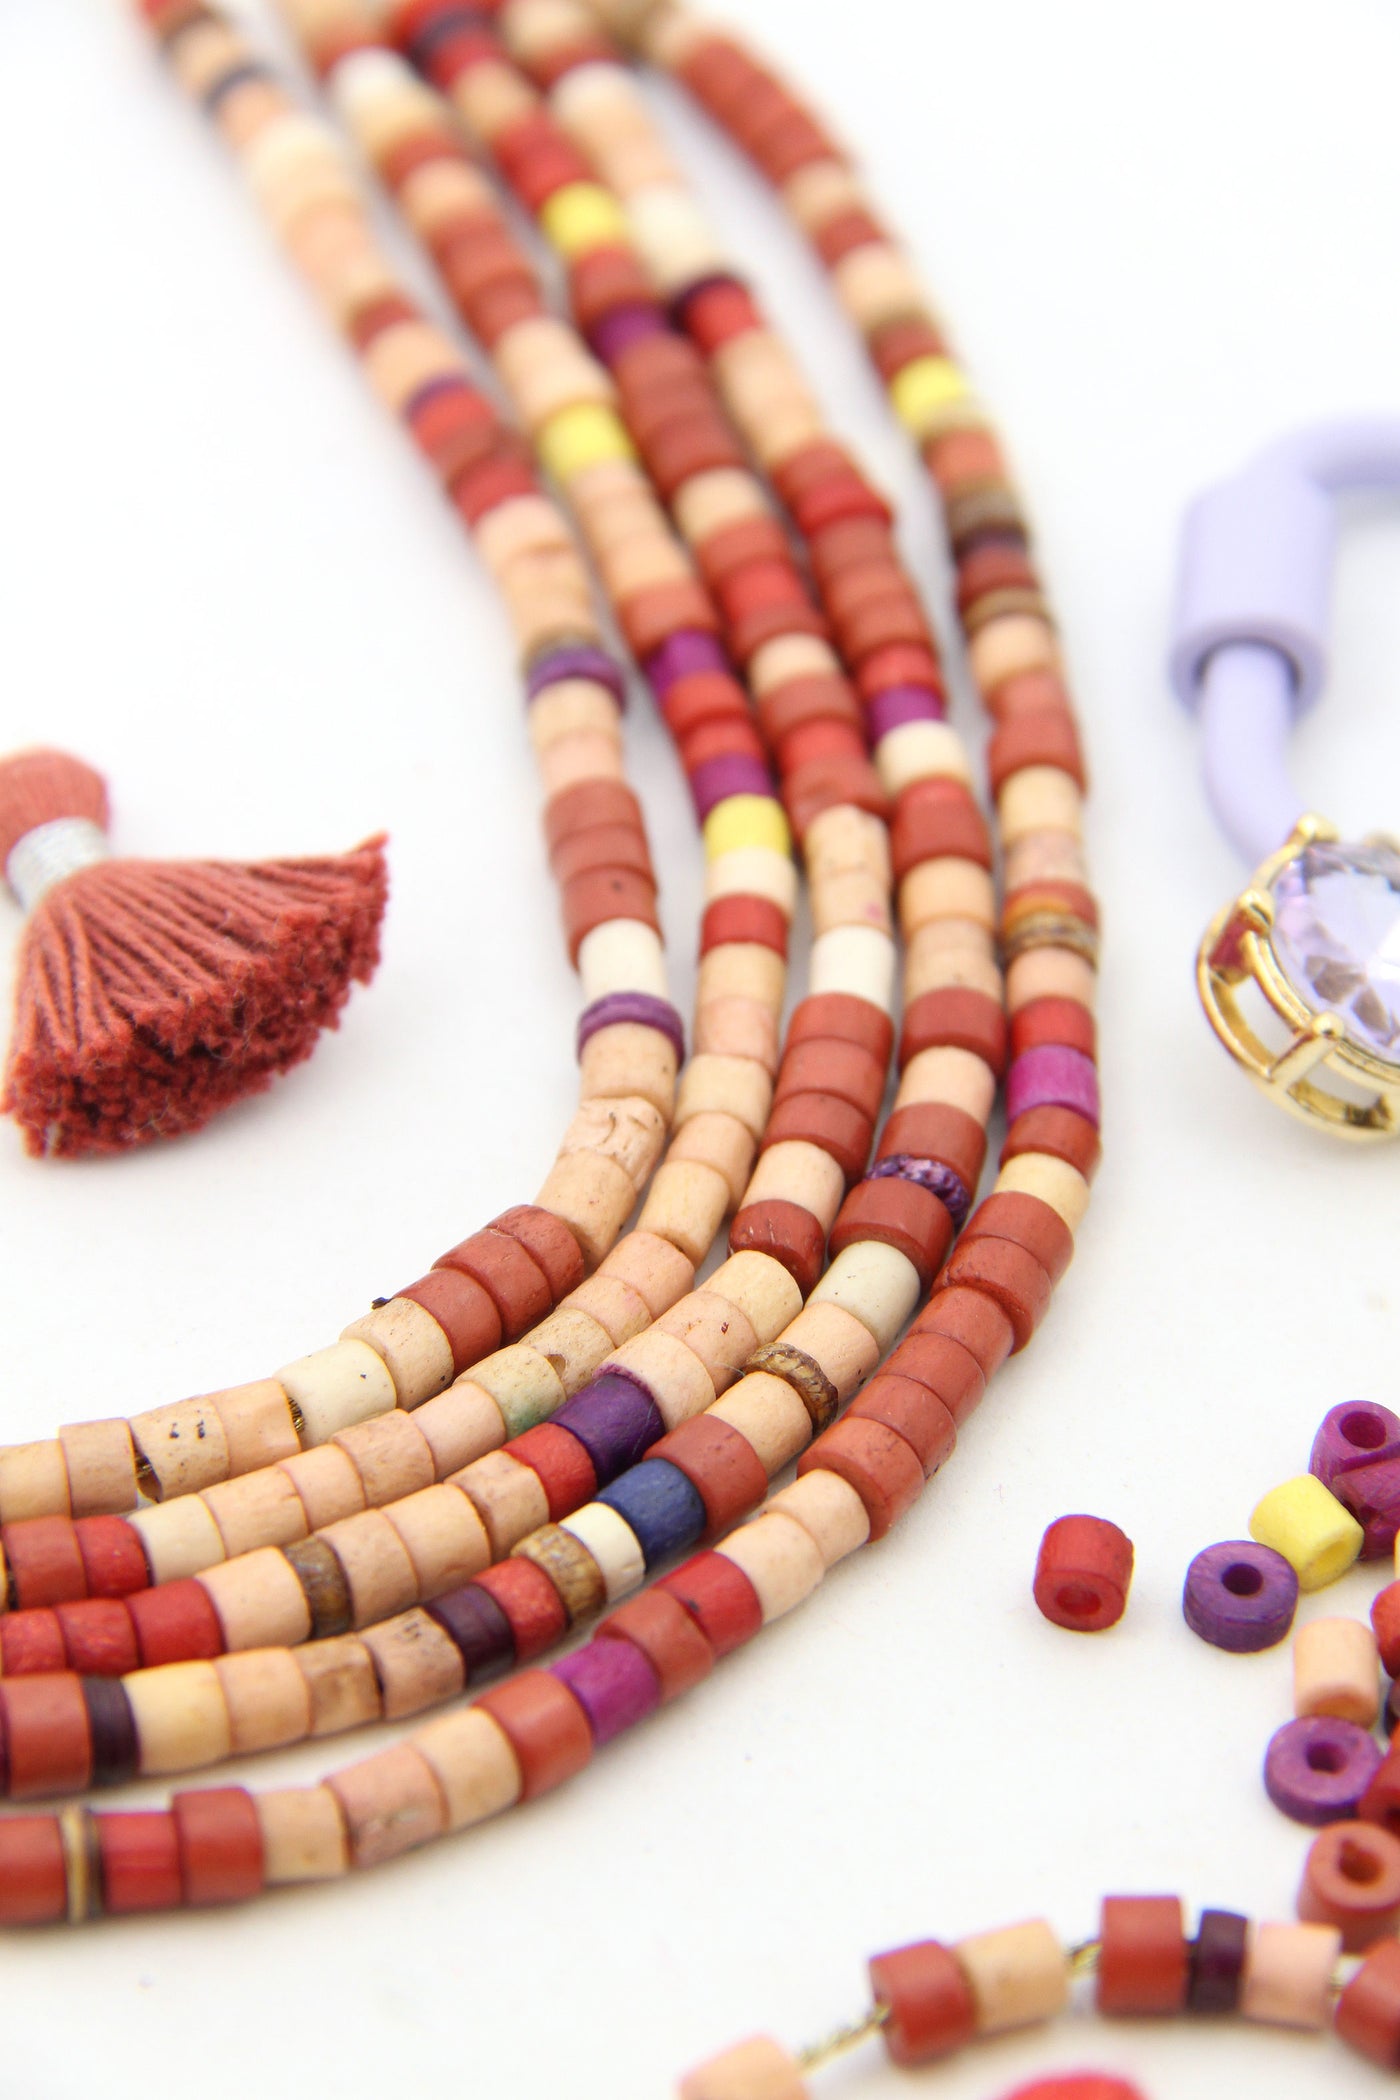 Beads for for making Valentine's Day Beaded Bracelets and Jewelry